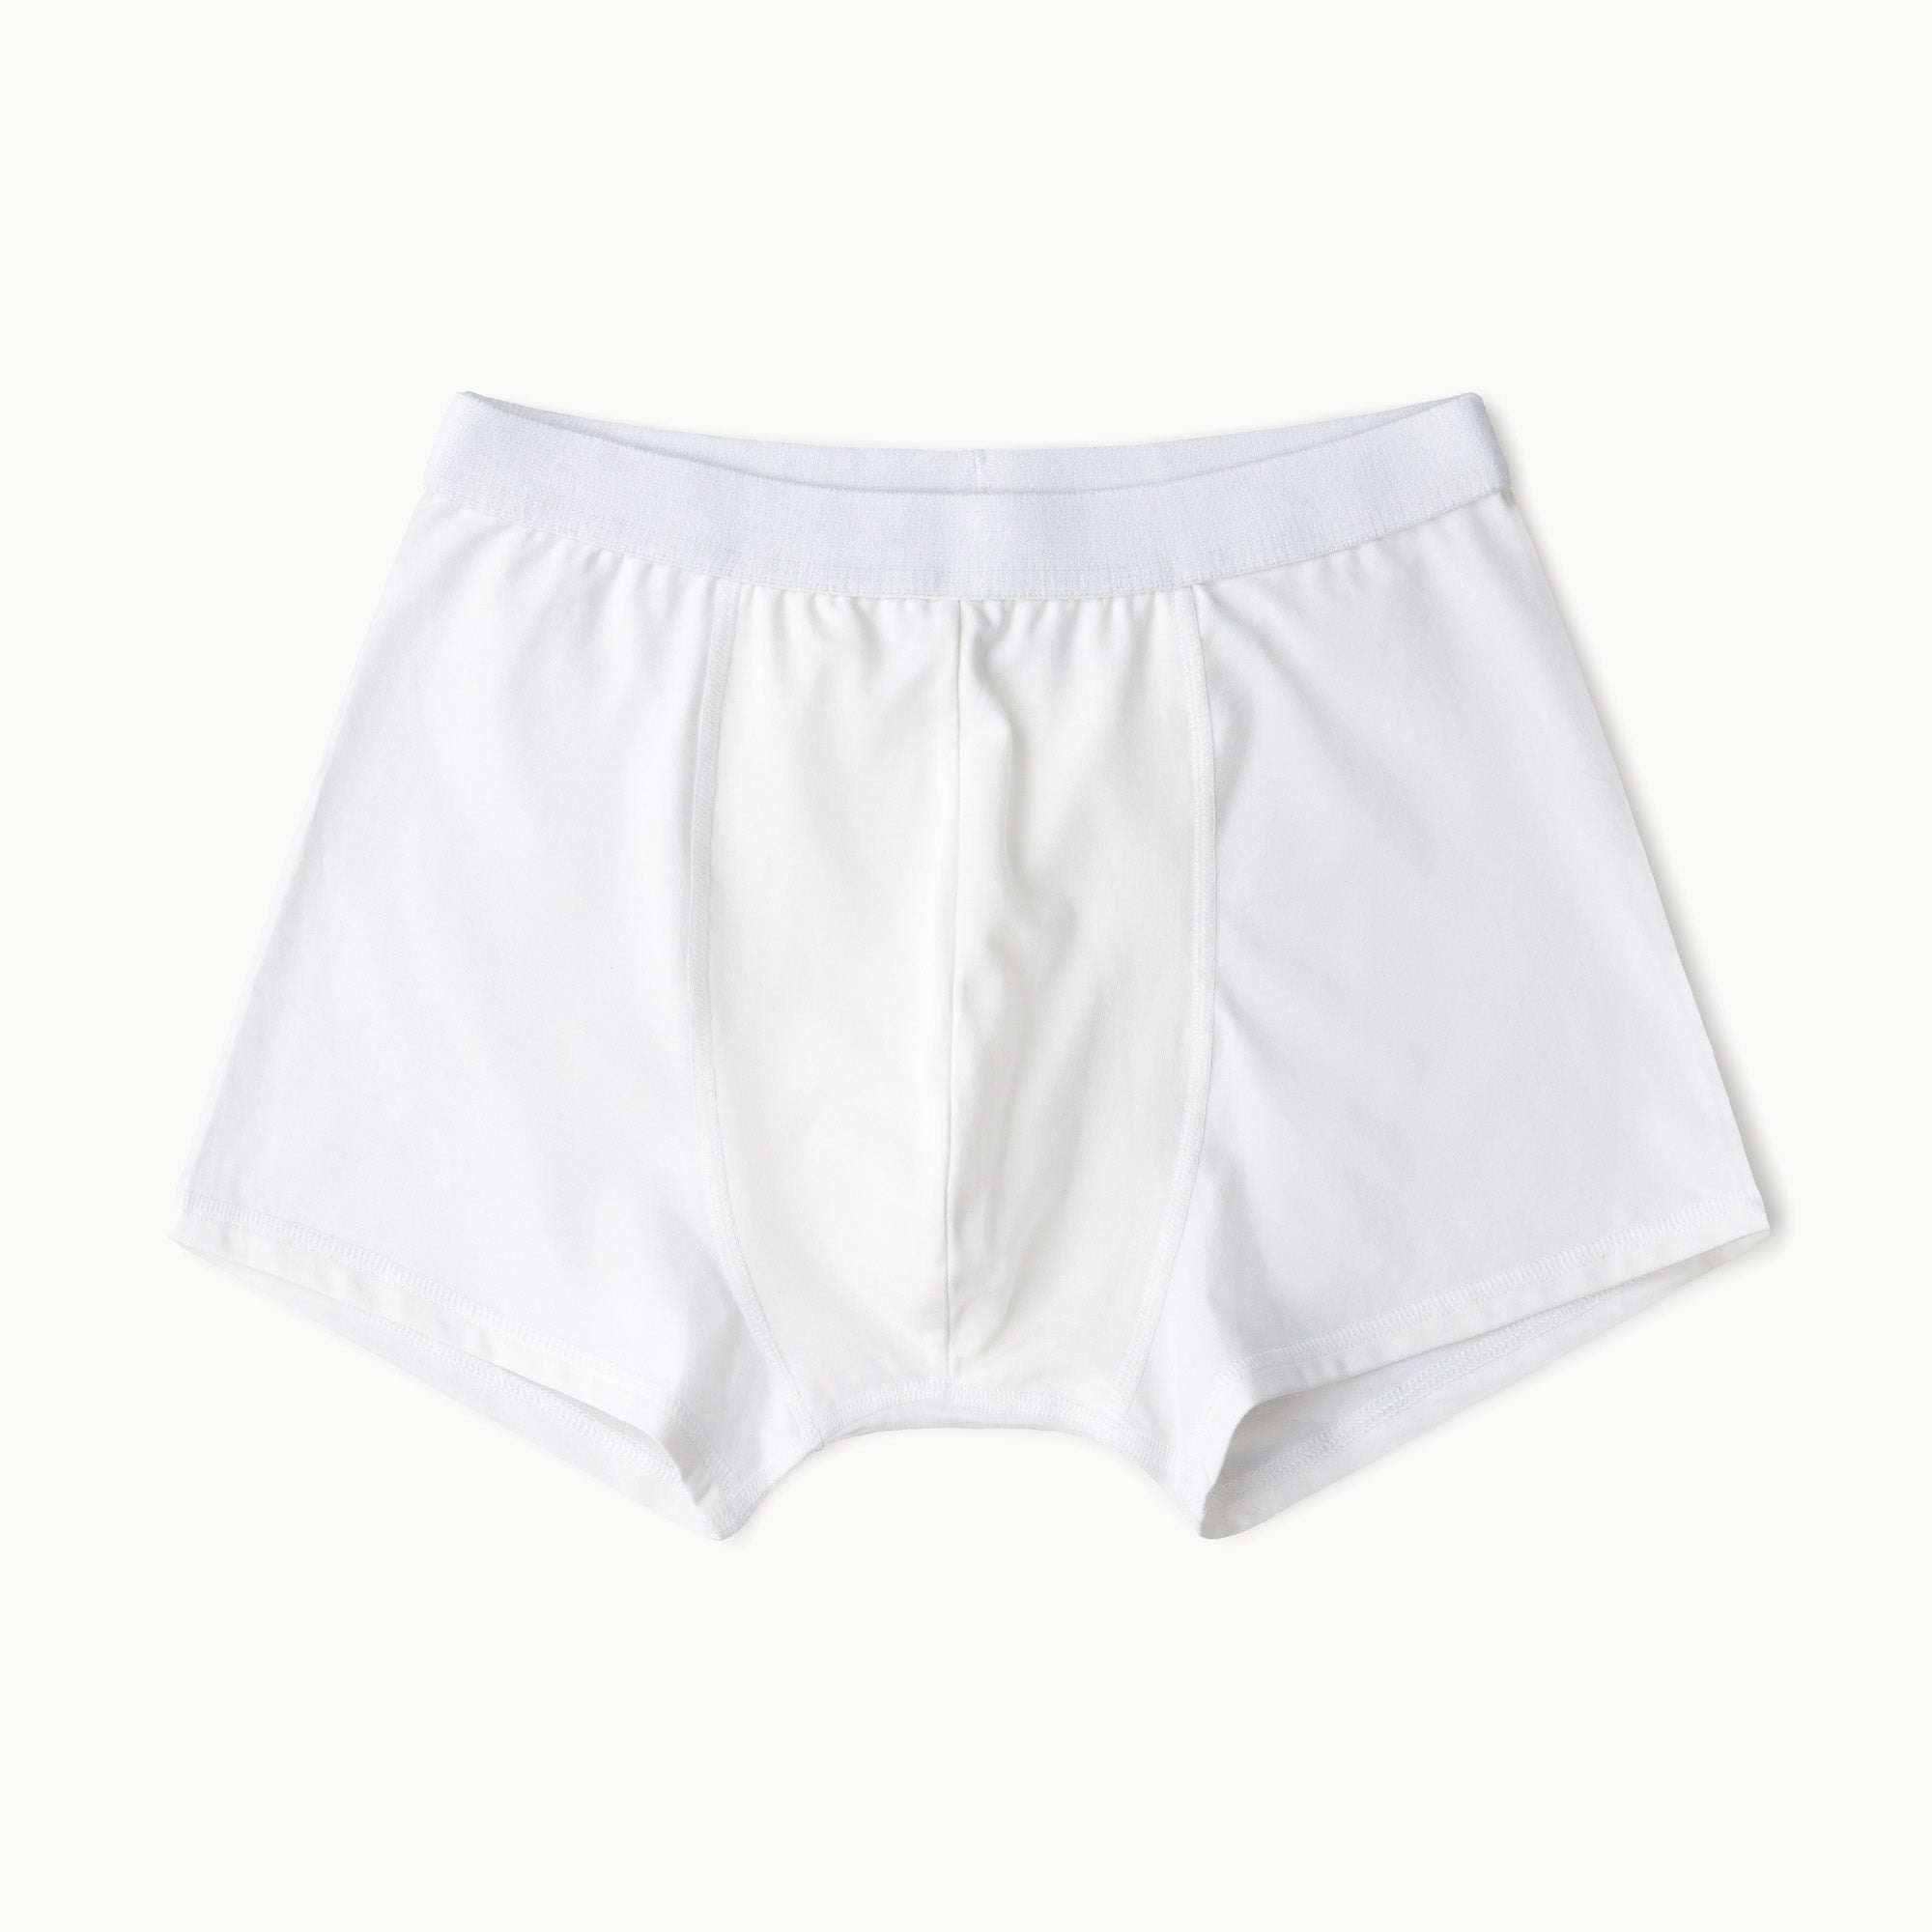 ONE Essentials, White , Recycled, Organic cotton_biodegradable boxers_ONEE